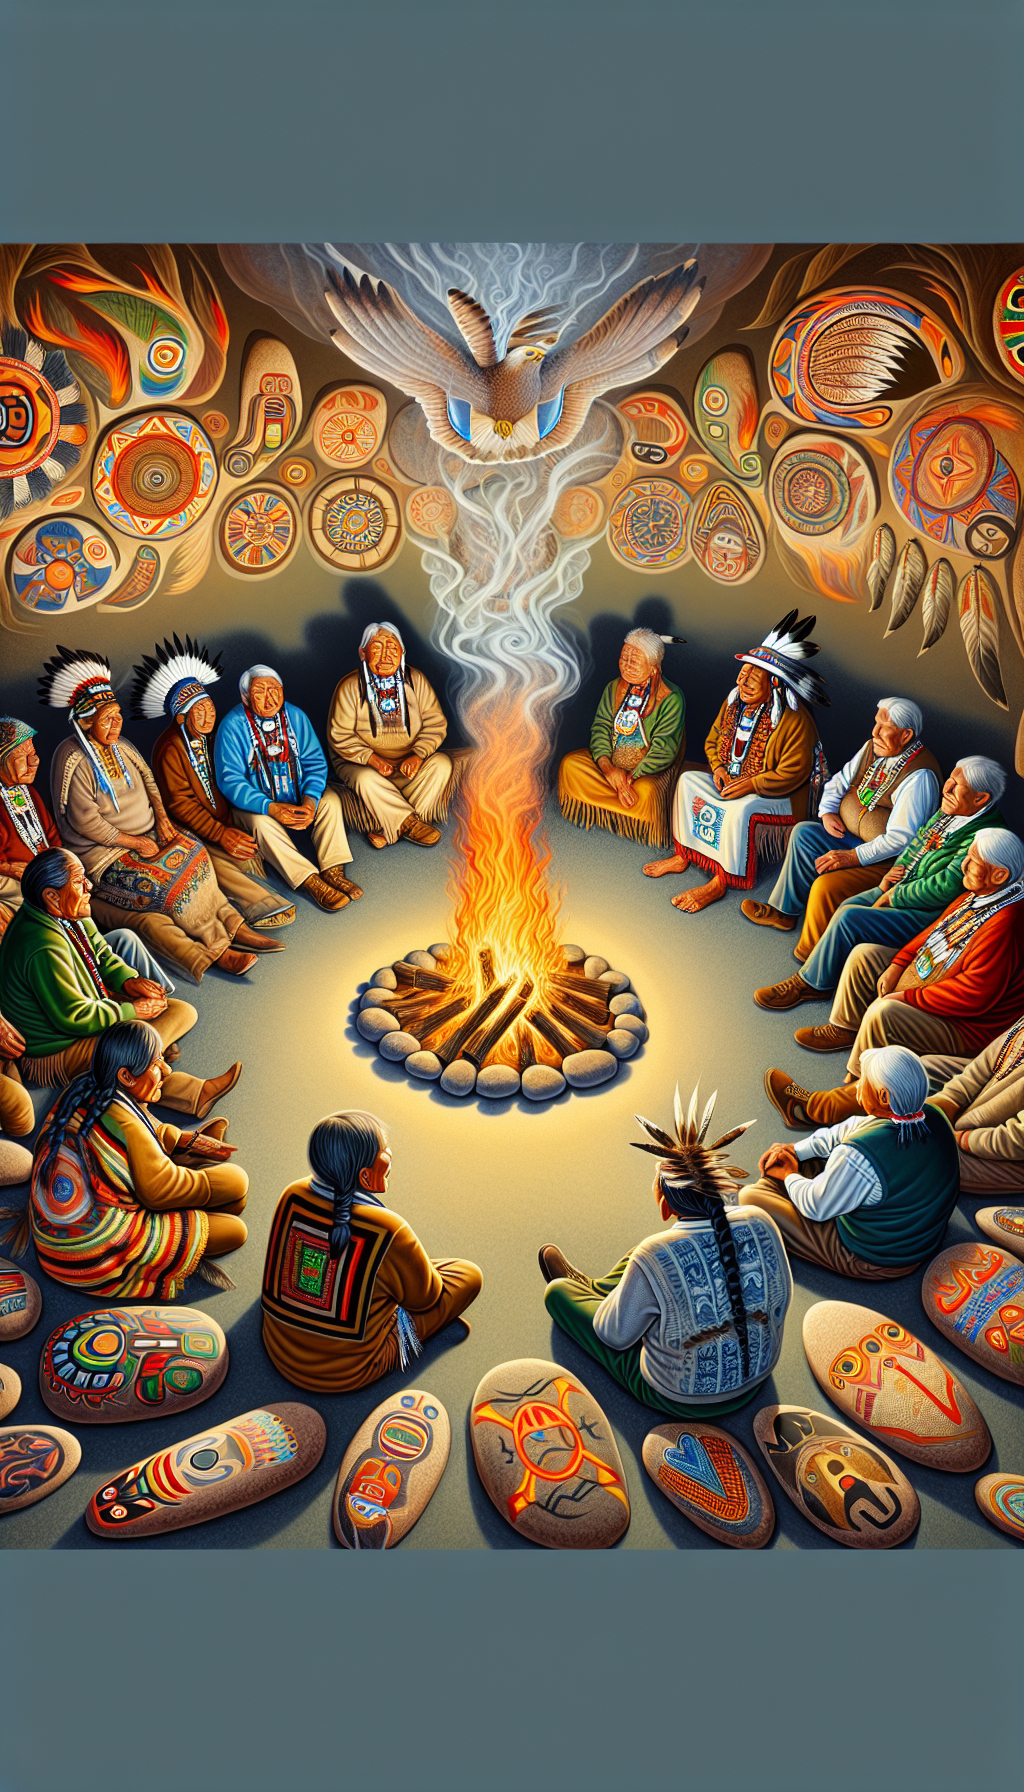 An illustration shows a circle of elder Native Americans sharing stories around a sacred fire ignited by traditional fire starter rocks. In the flickering flames, faint shapes of iconic totems and animals emerge, symbolizing the rich cultural heritage. The rocks are depicted with intricate, colorful patterns, emphasizing their deep value and significance within the tribe's traditions.